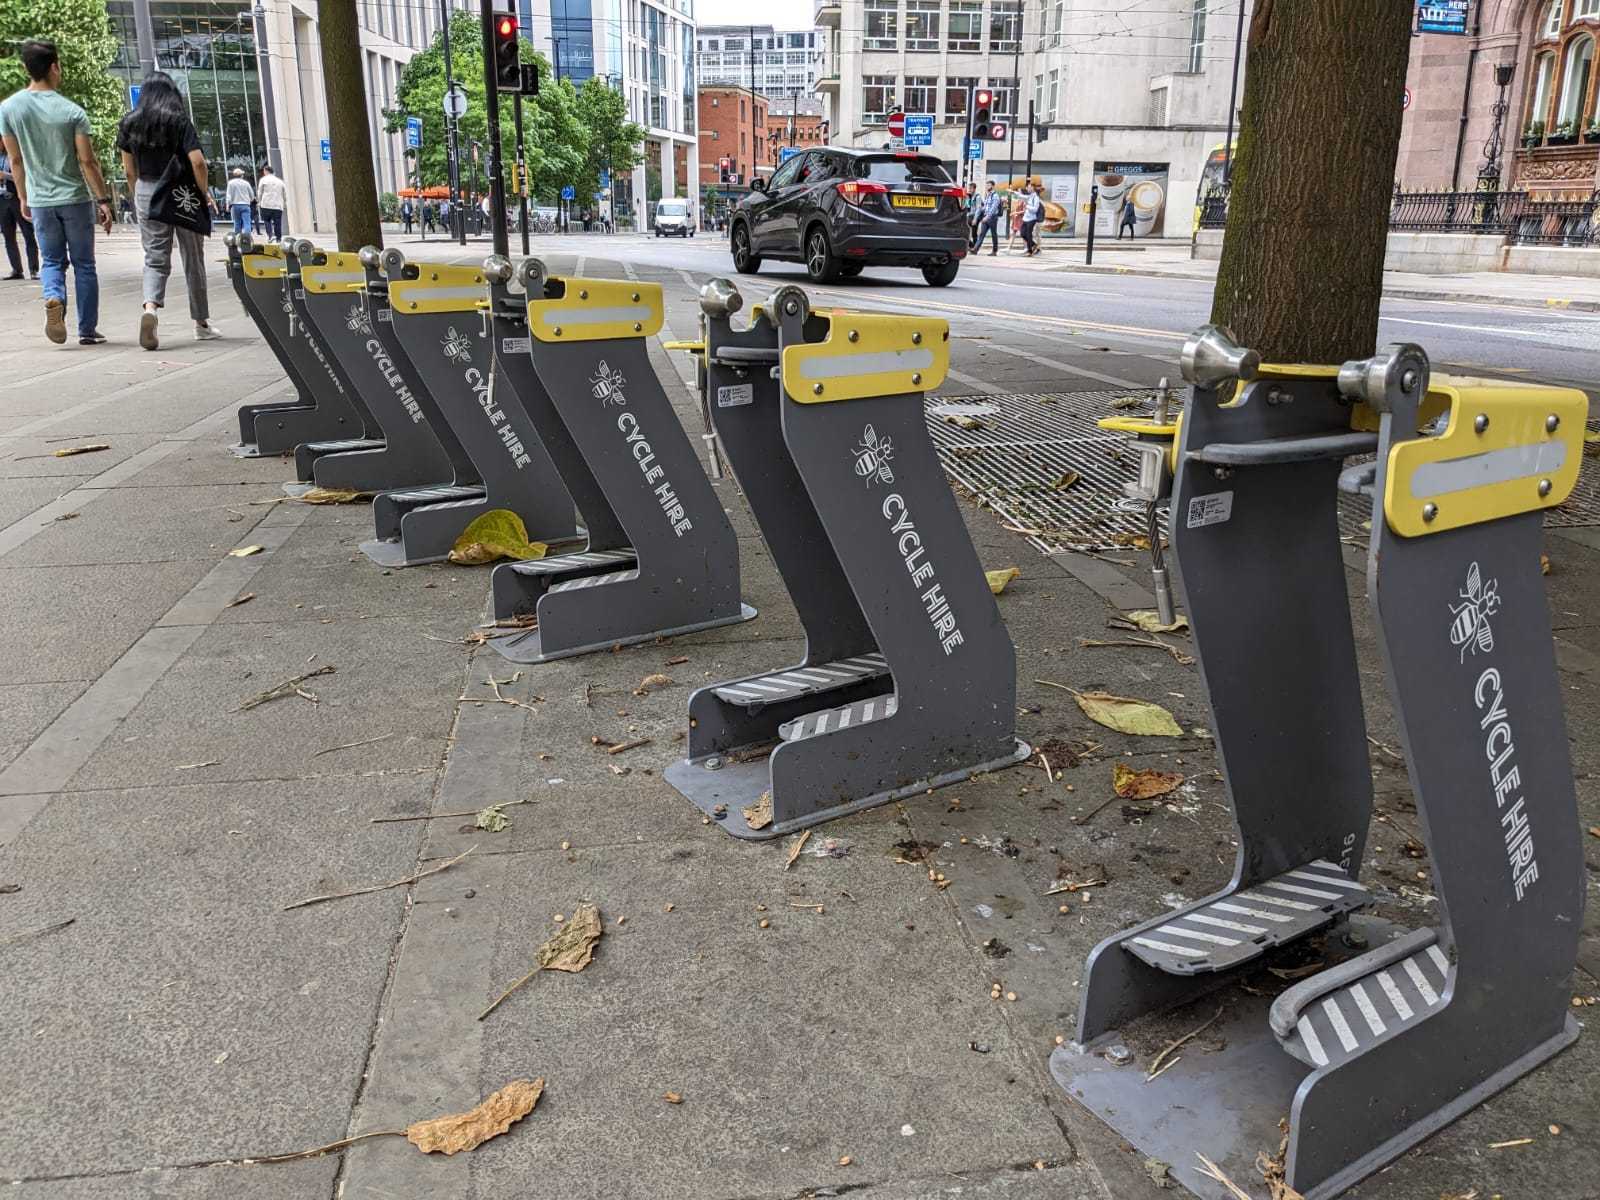 A Bee Bike stand by Central Library, Manchester (Picture: LDRS)